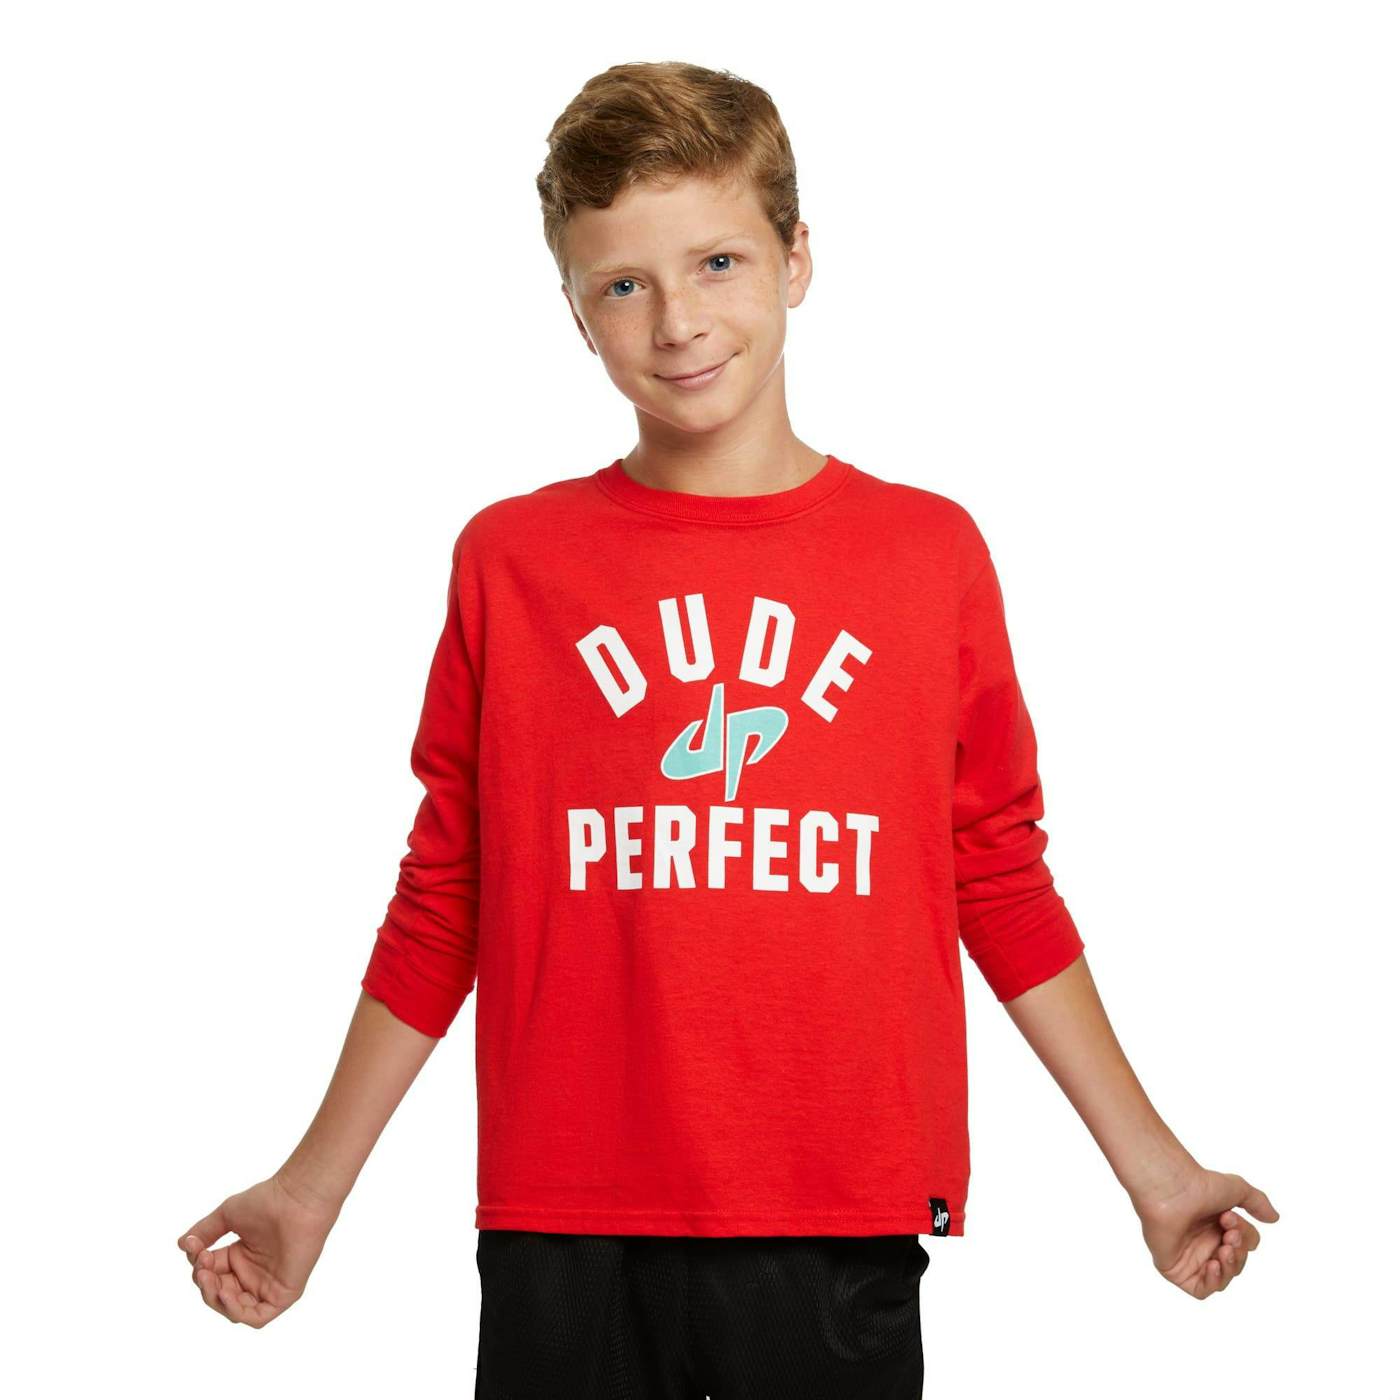 Dude Perfect The G.O.A.T. Long Sleeve Tee